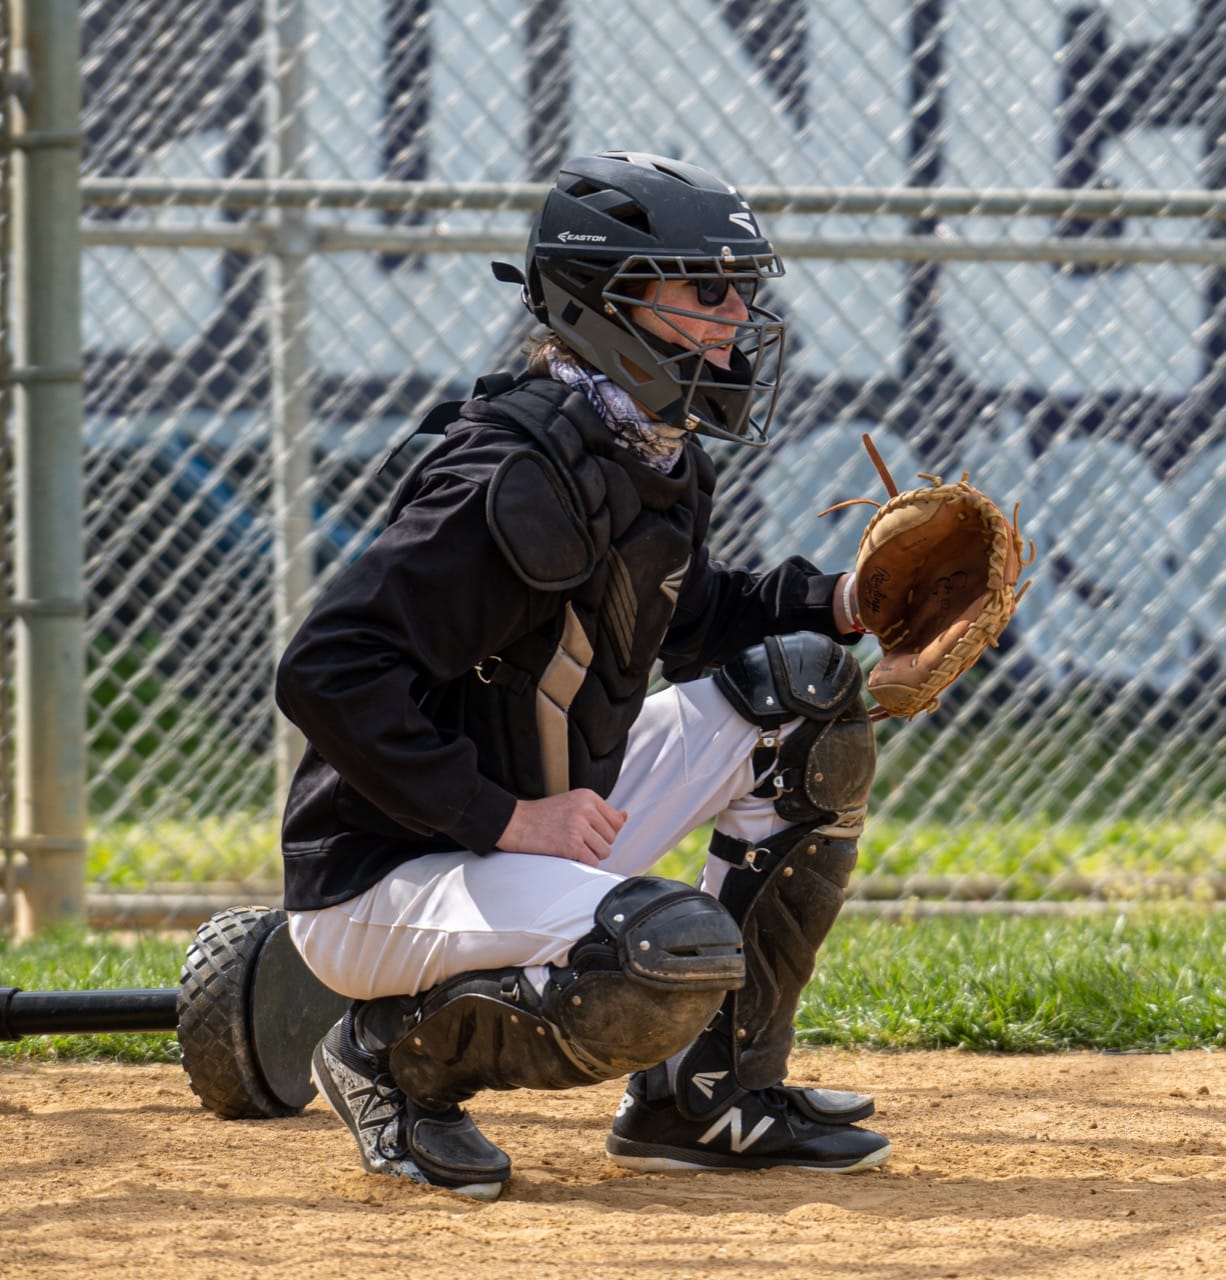 Can We Guess What Position You Played in Little League?